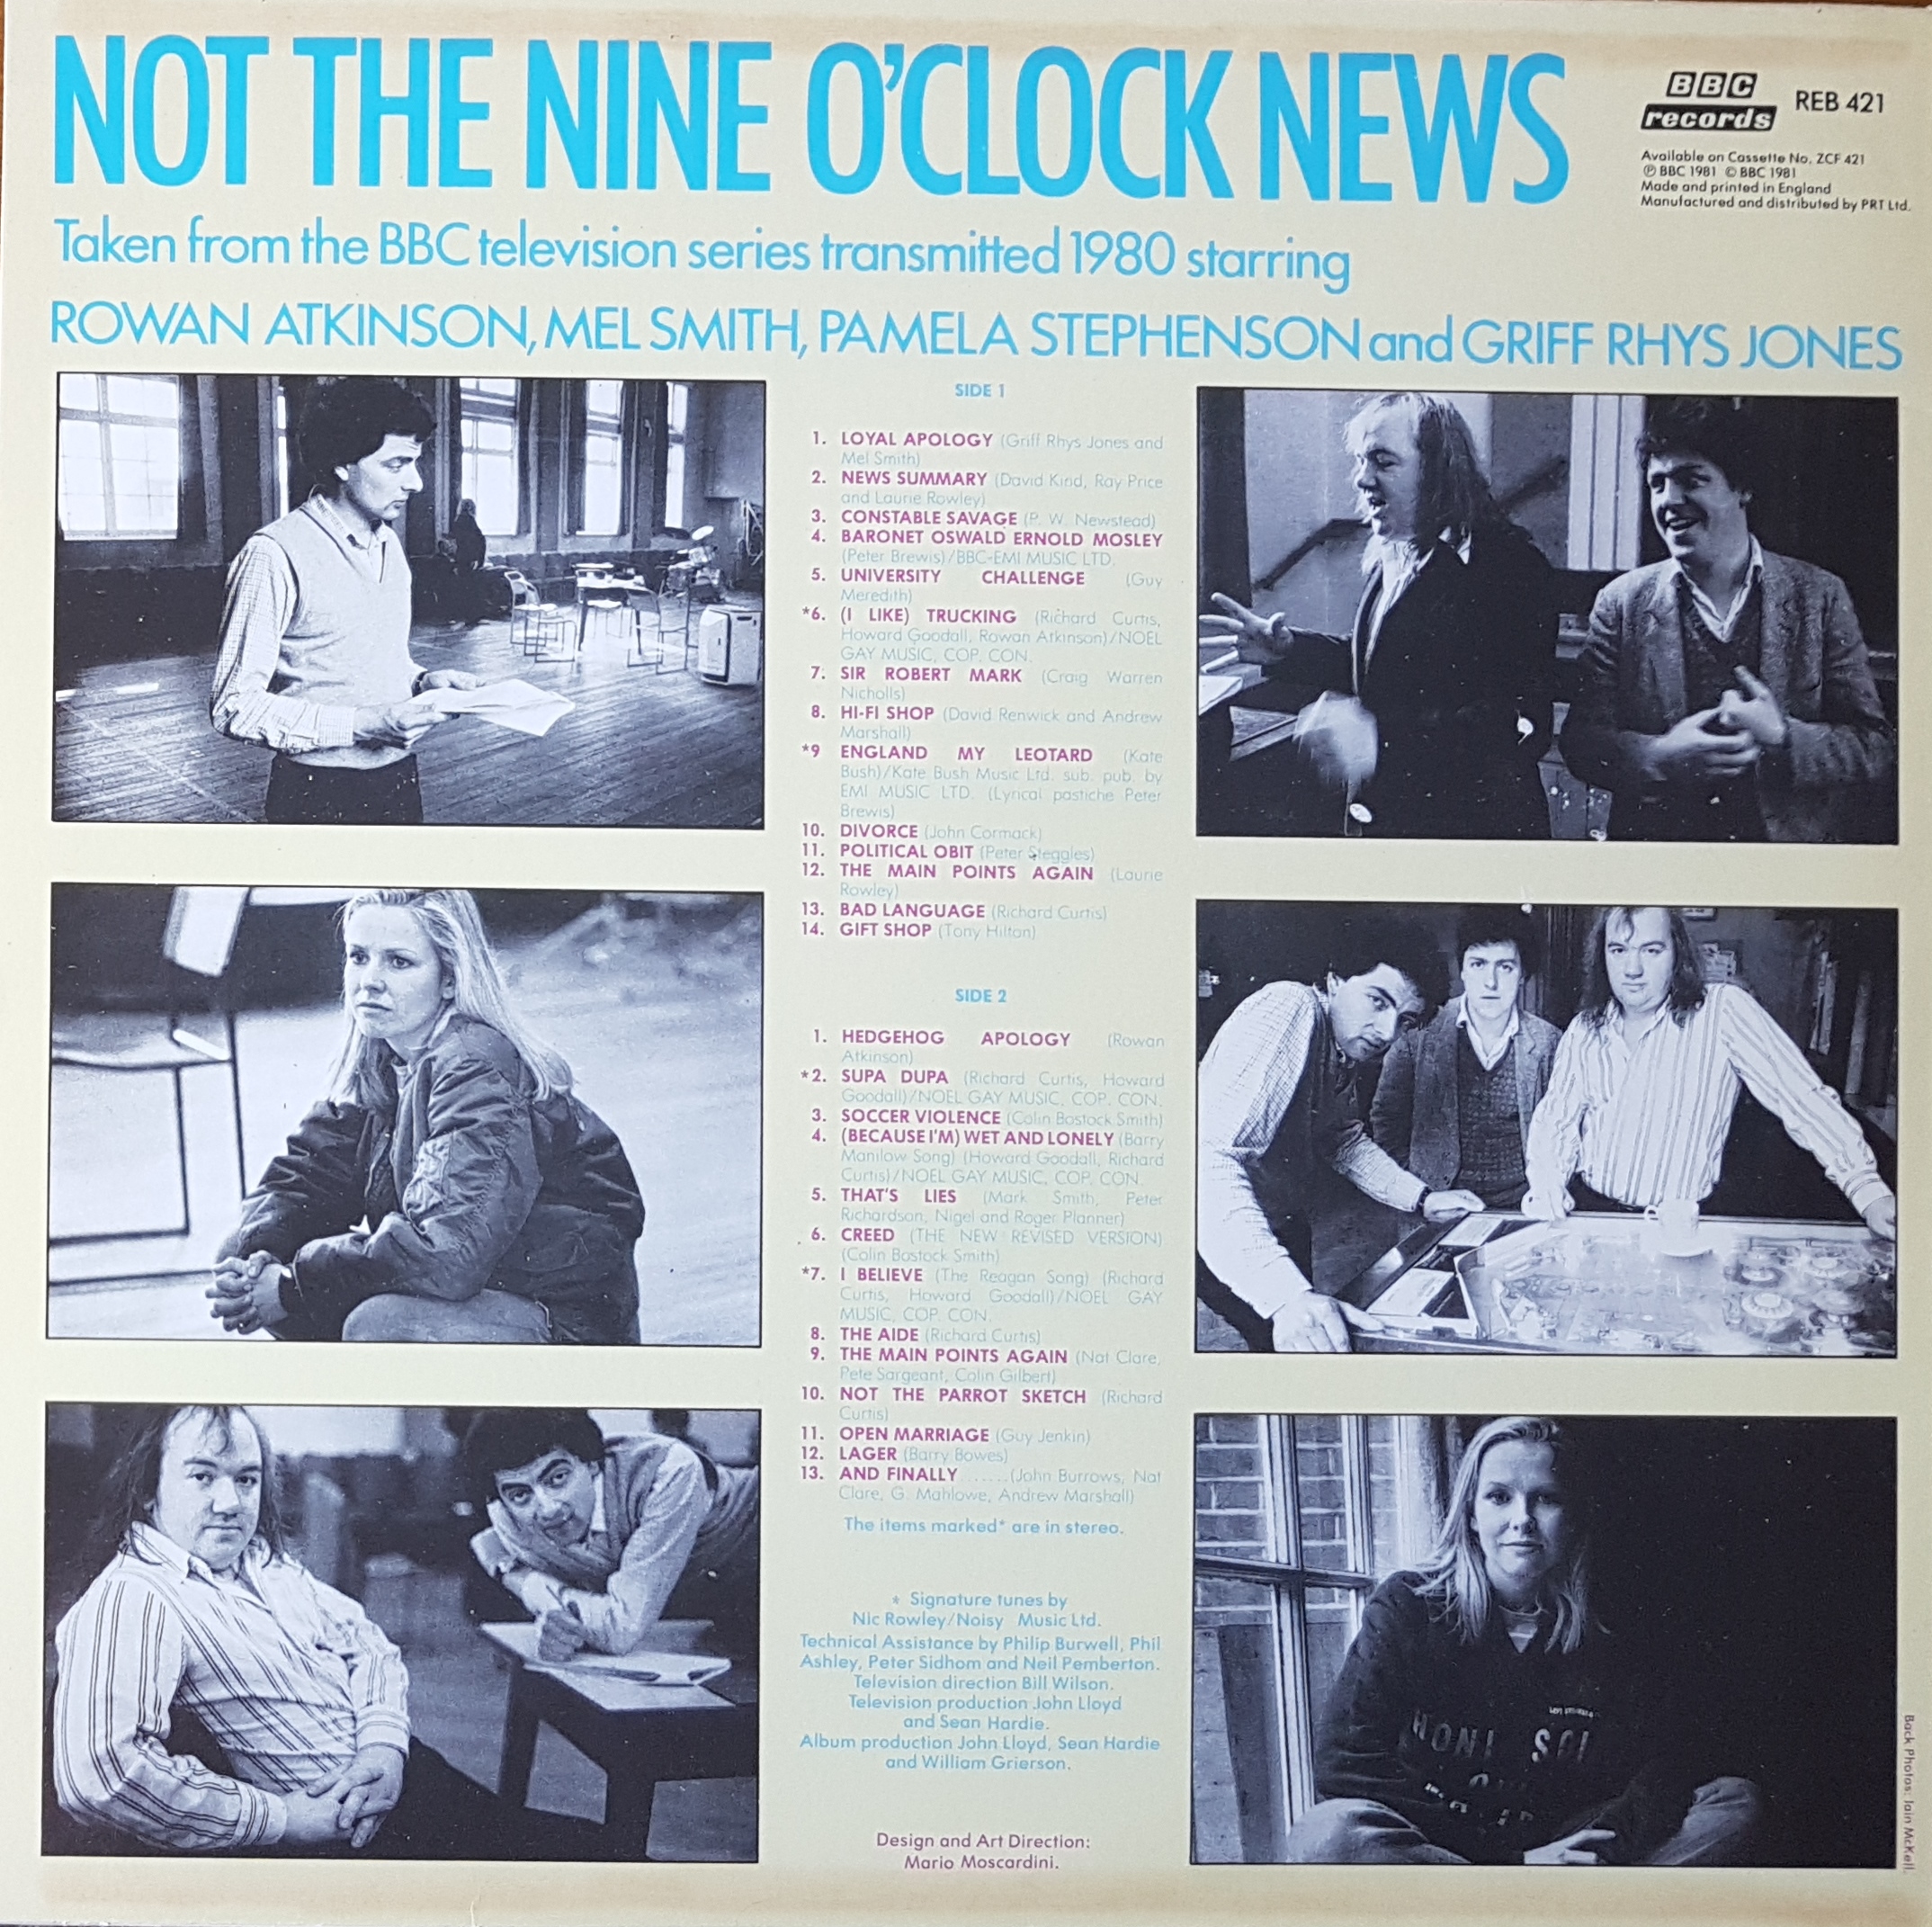 Picture of REB 421 Not the nine o'clock news - Hedgehog sandwich by artist Various from the BBC records and Tapes library